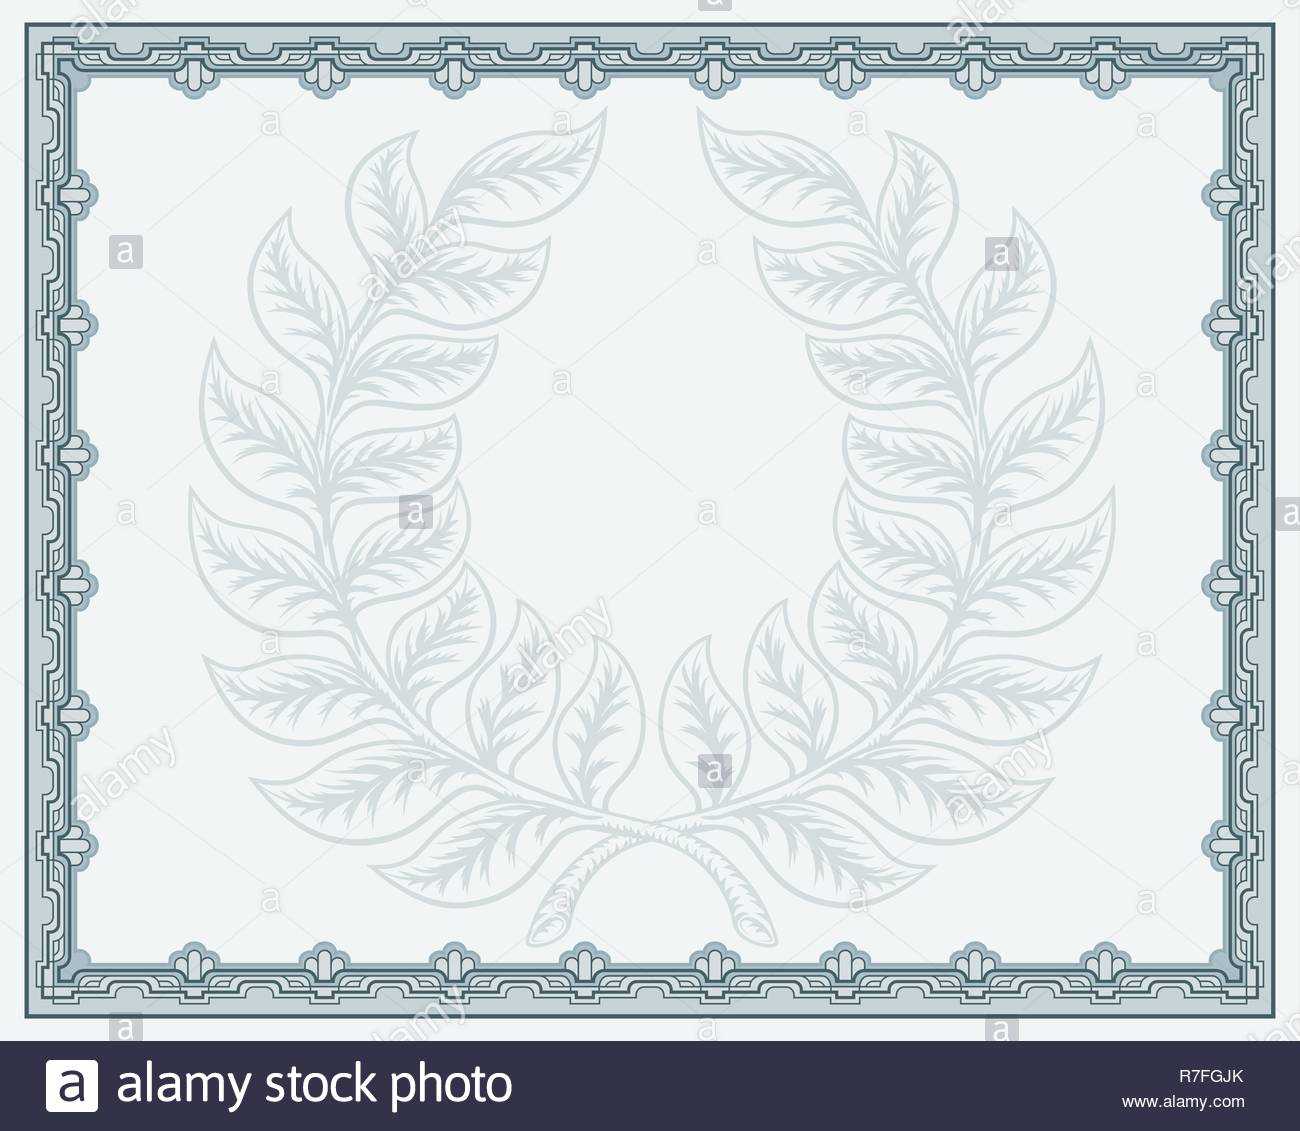 Certificate Template Diploma Background Stock Vector Art Throughout Qualification Certificate Template